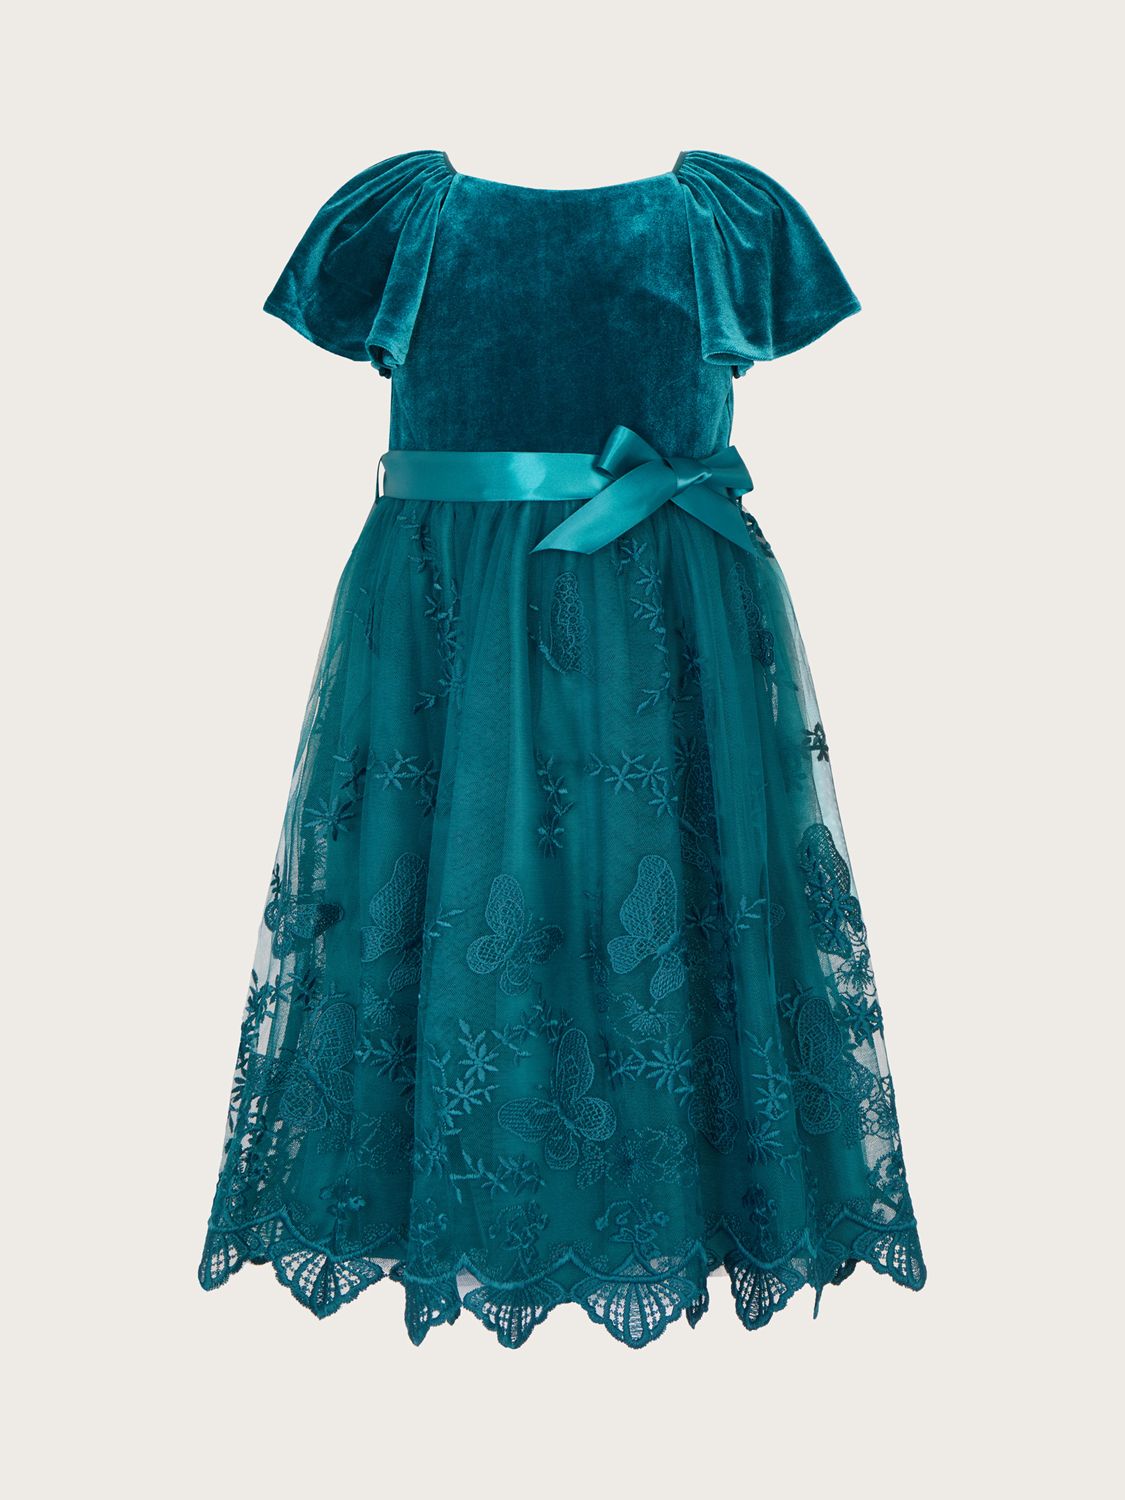 Monsoon Kids' May Velvet & Lace Butterfly Occasion Dress, Teal, 14-15 years